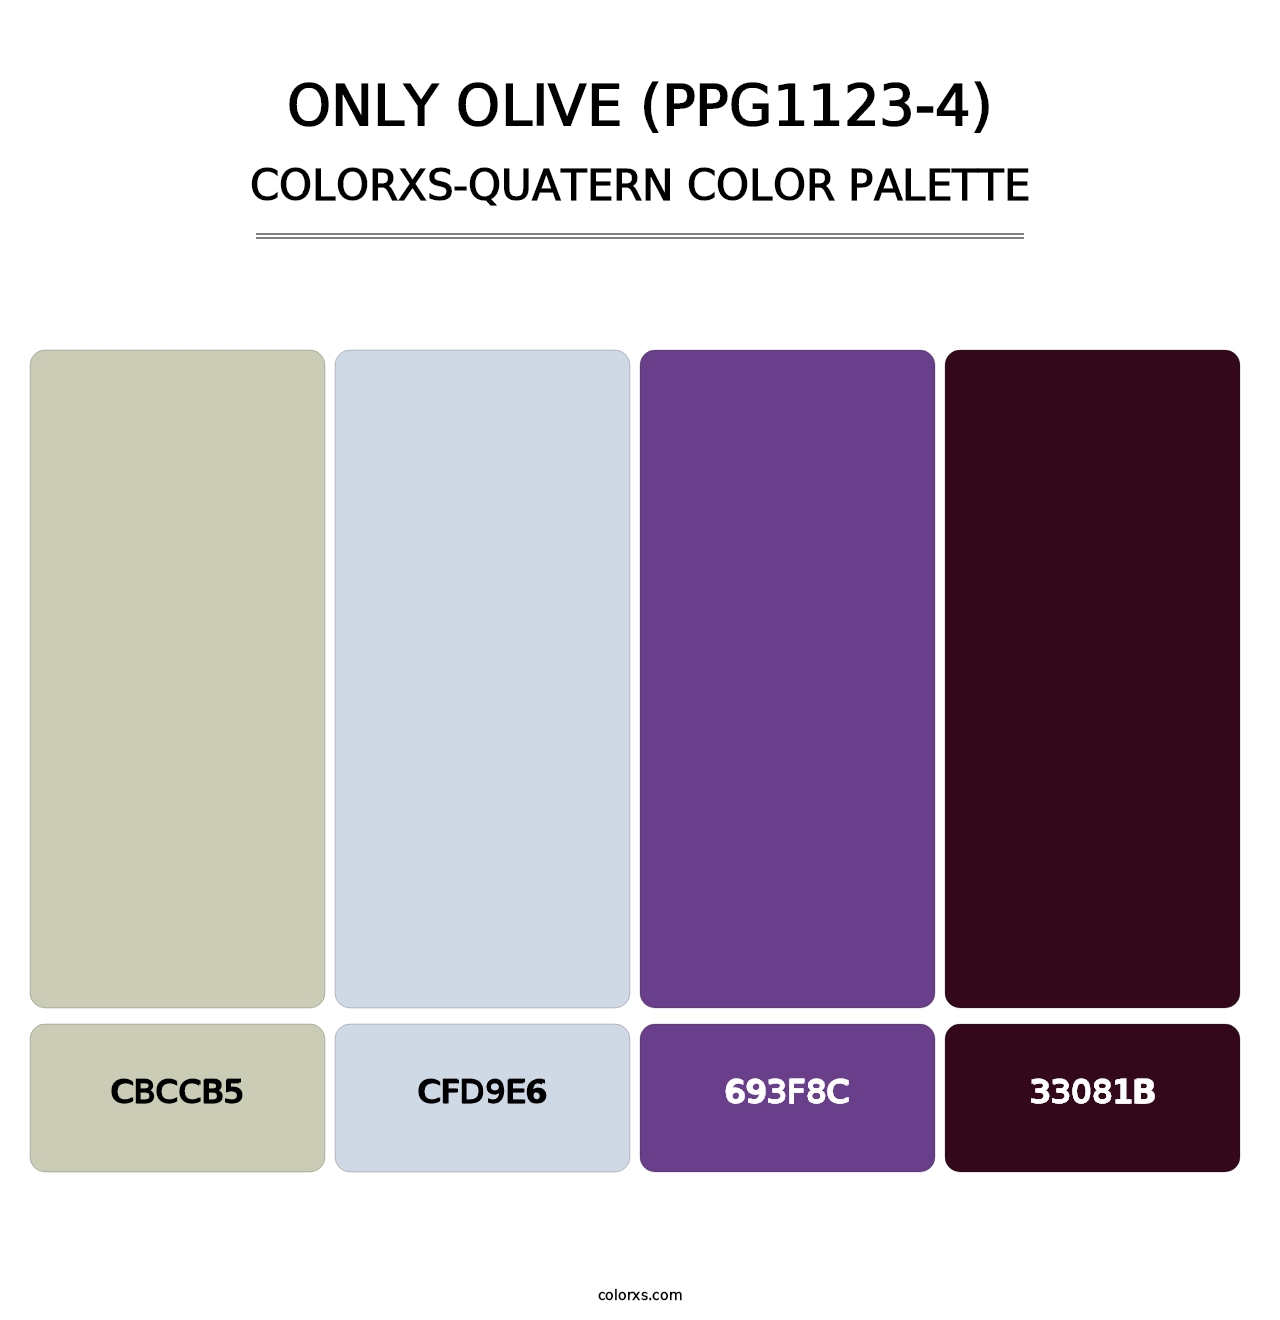 Only Olive (PPG1123-4) - Colorxs Quatern Palette